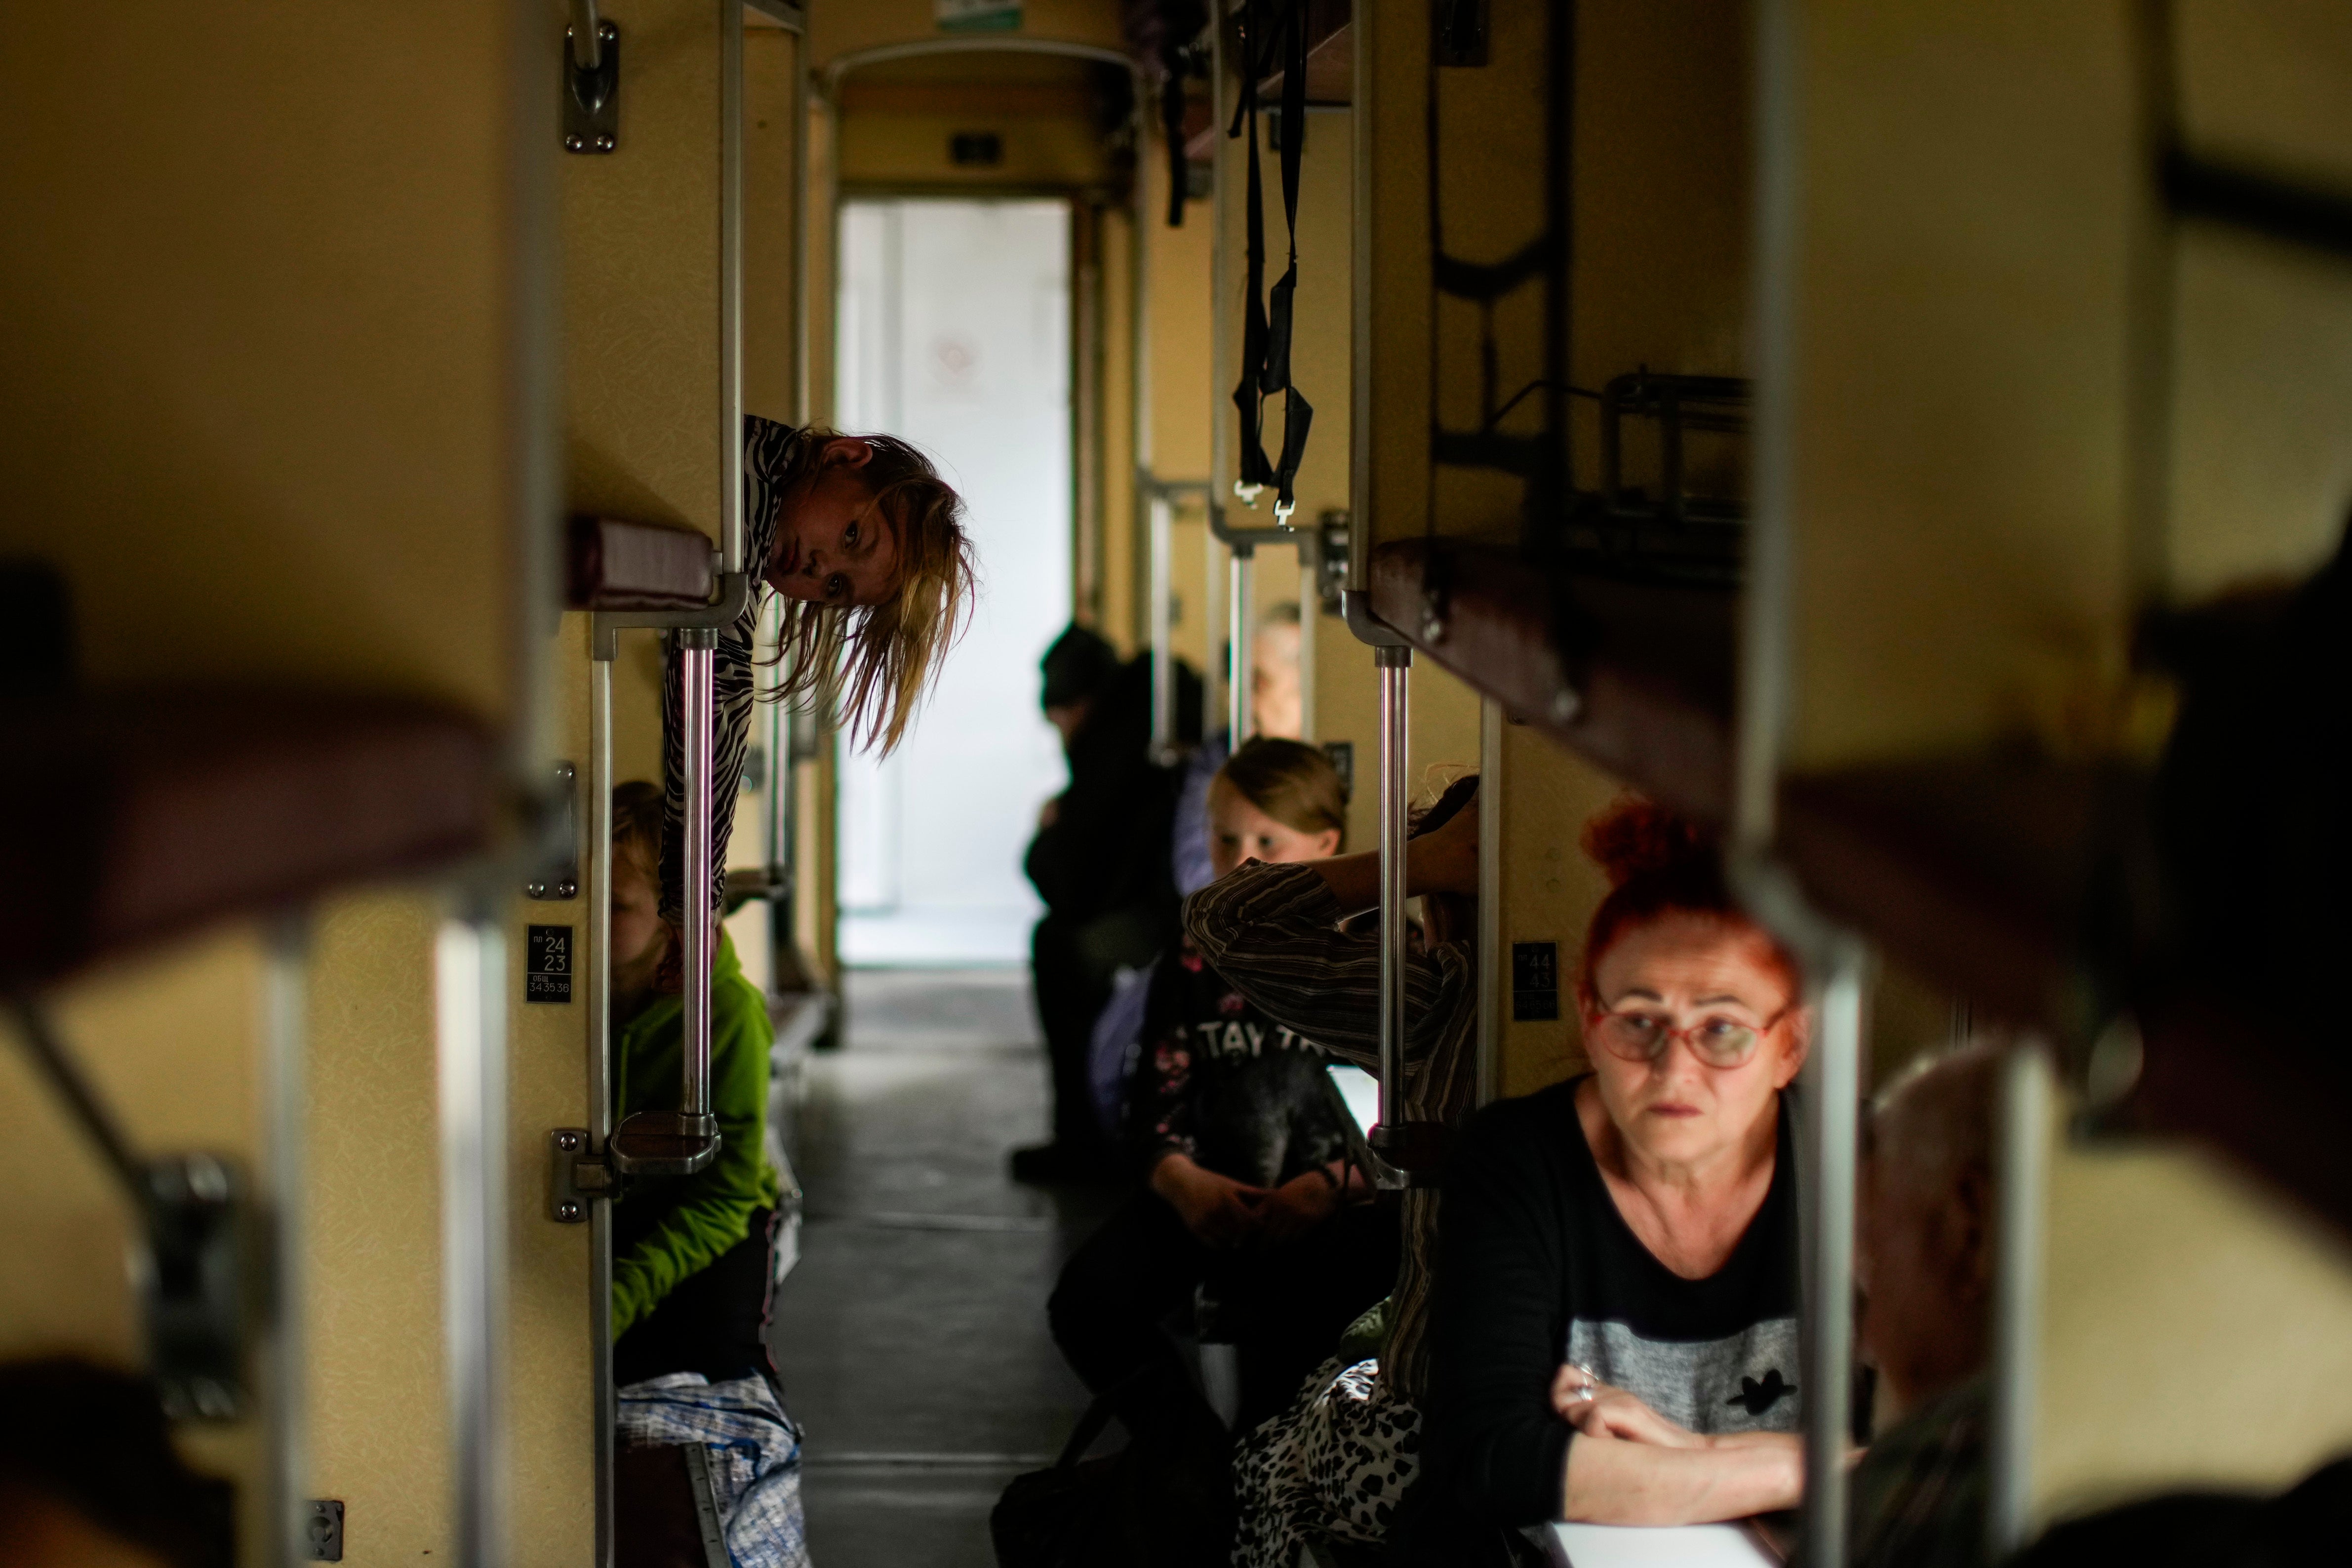 People fleeing from Lysychansk and other areas sit in an evacuation train at the train station in Pokrovsk